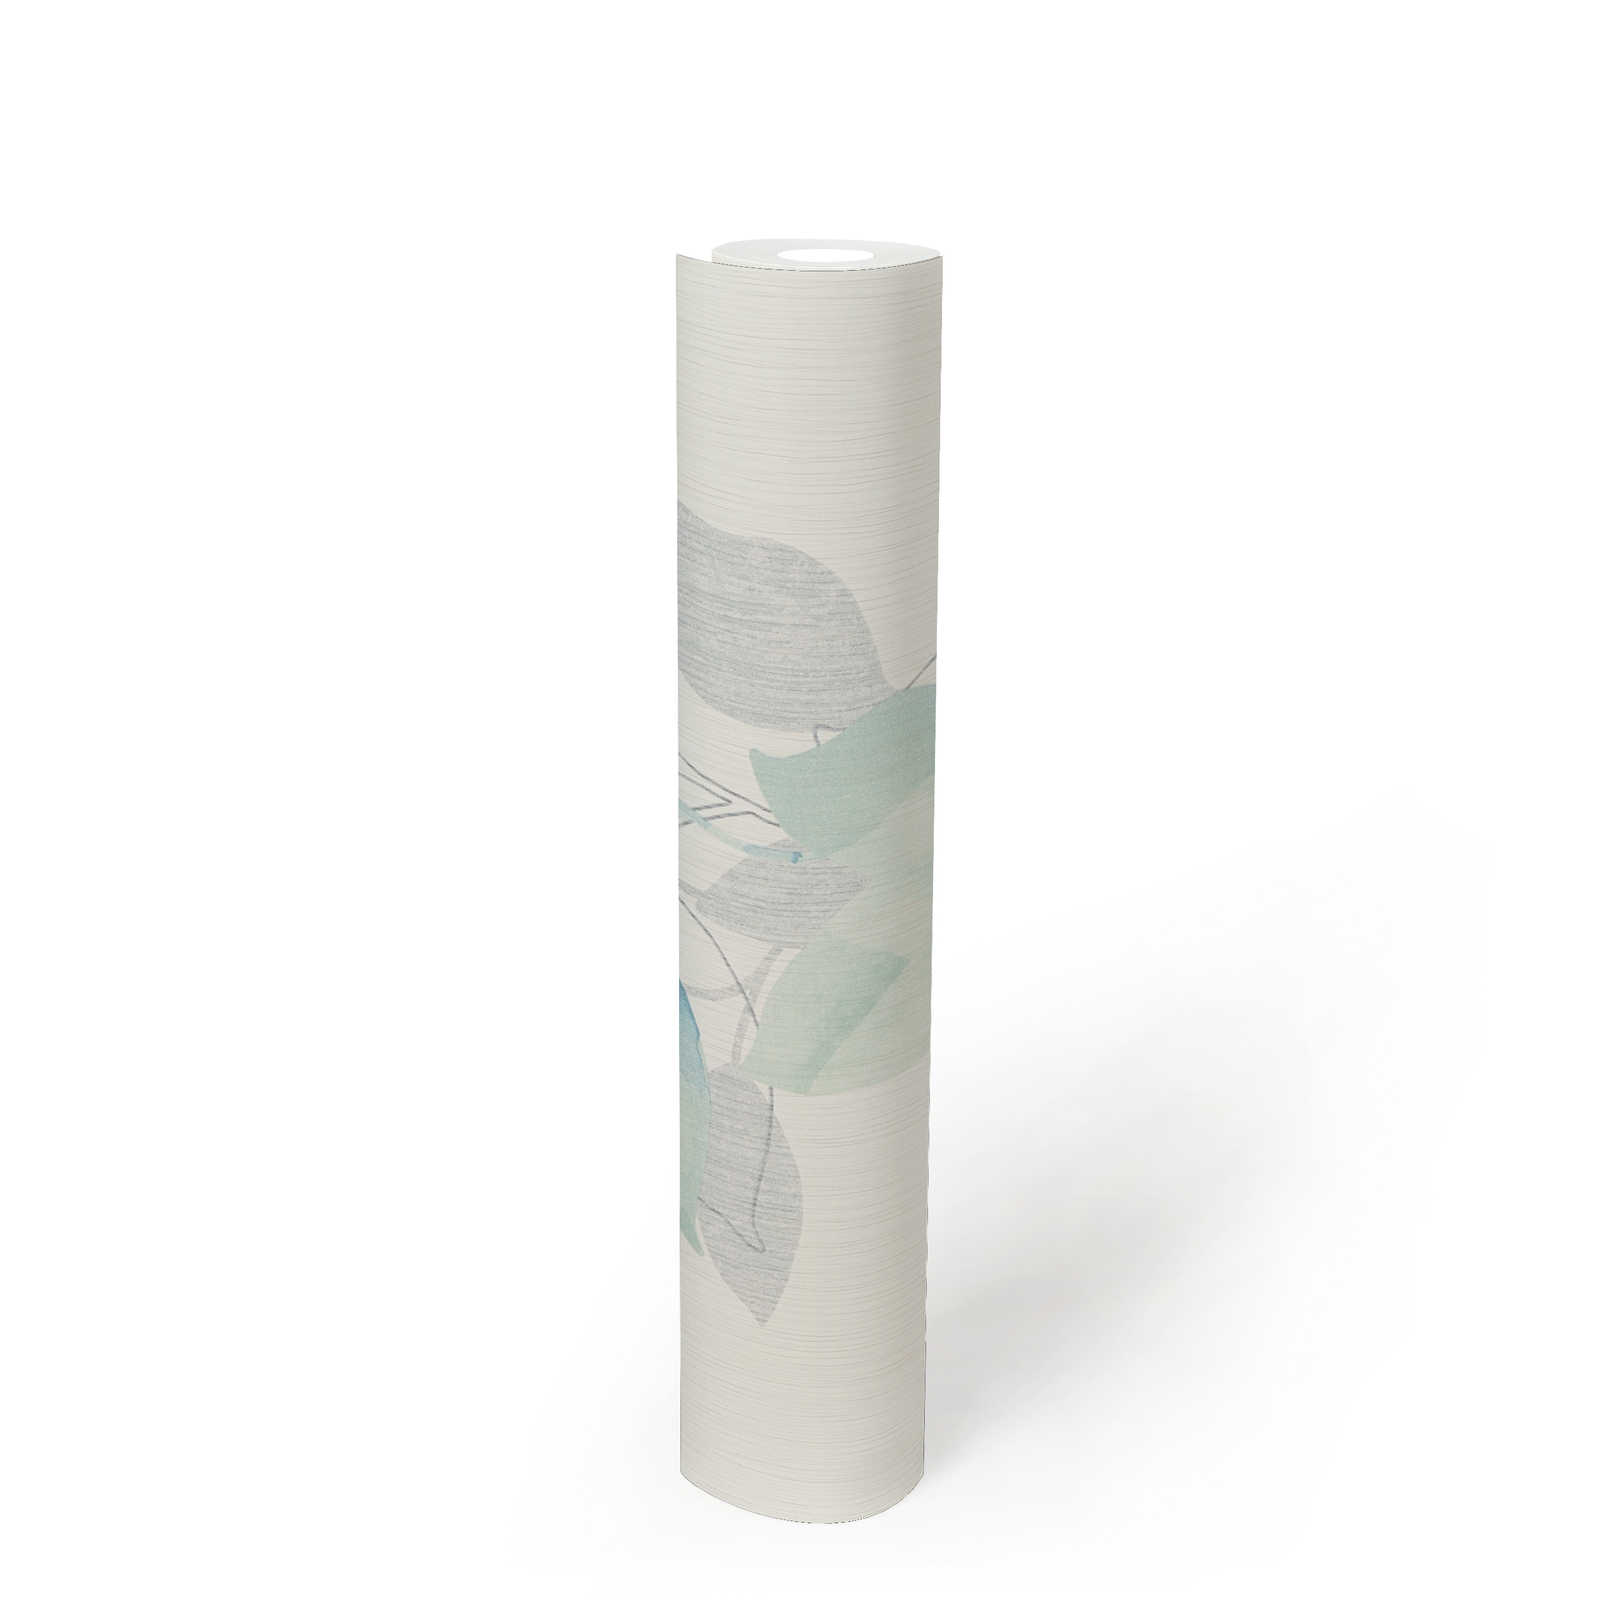             Non-woven wallpaper leaves with watercolour pattern - cream, blue
        